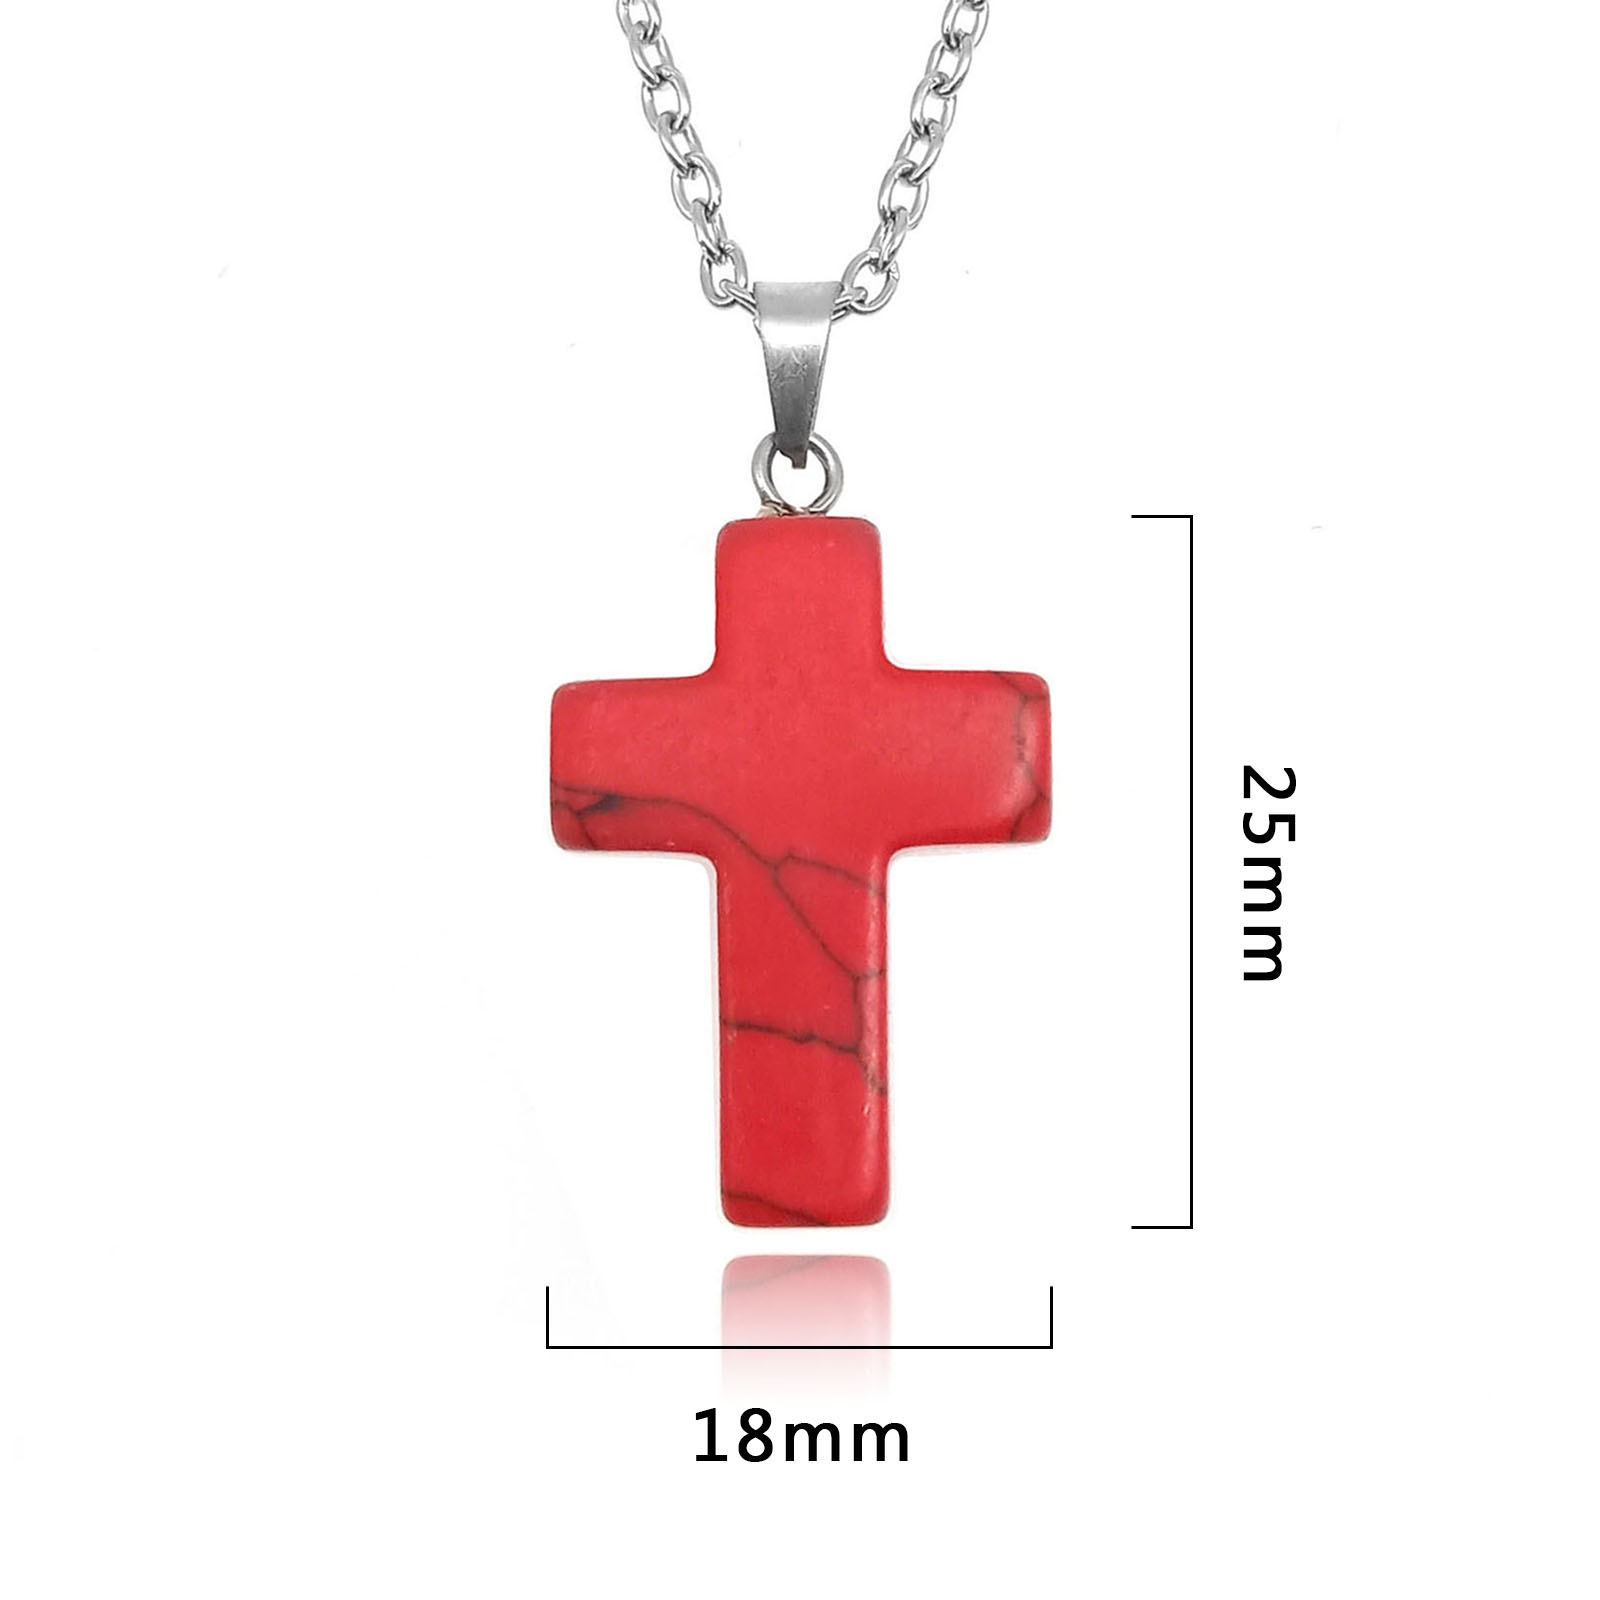 The pendant is about 18mm long, about 25mm high, about 5mm thick, and the chain is about 50cm long